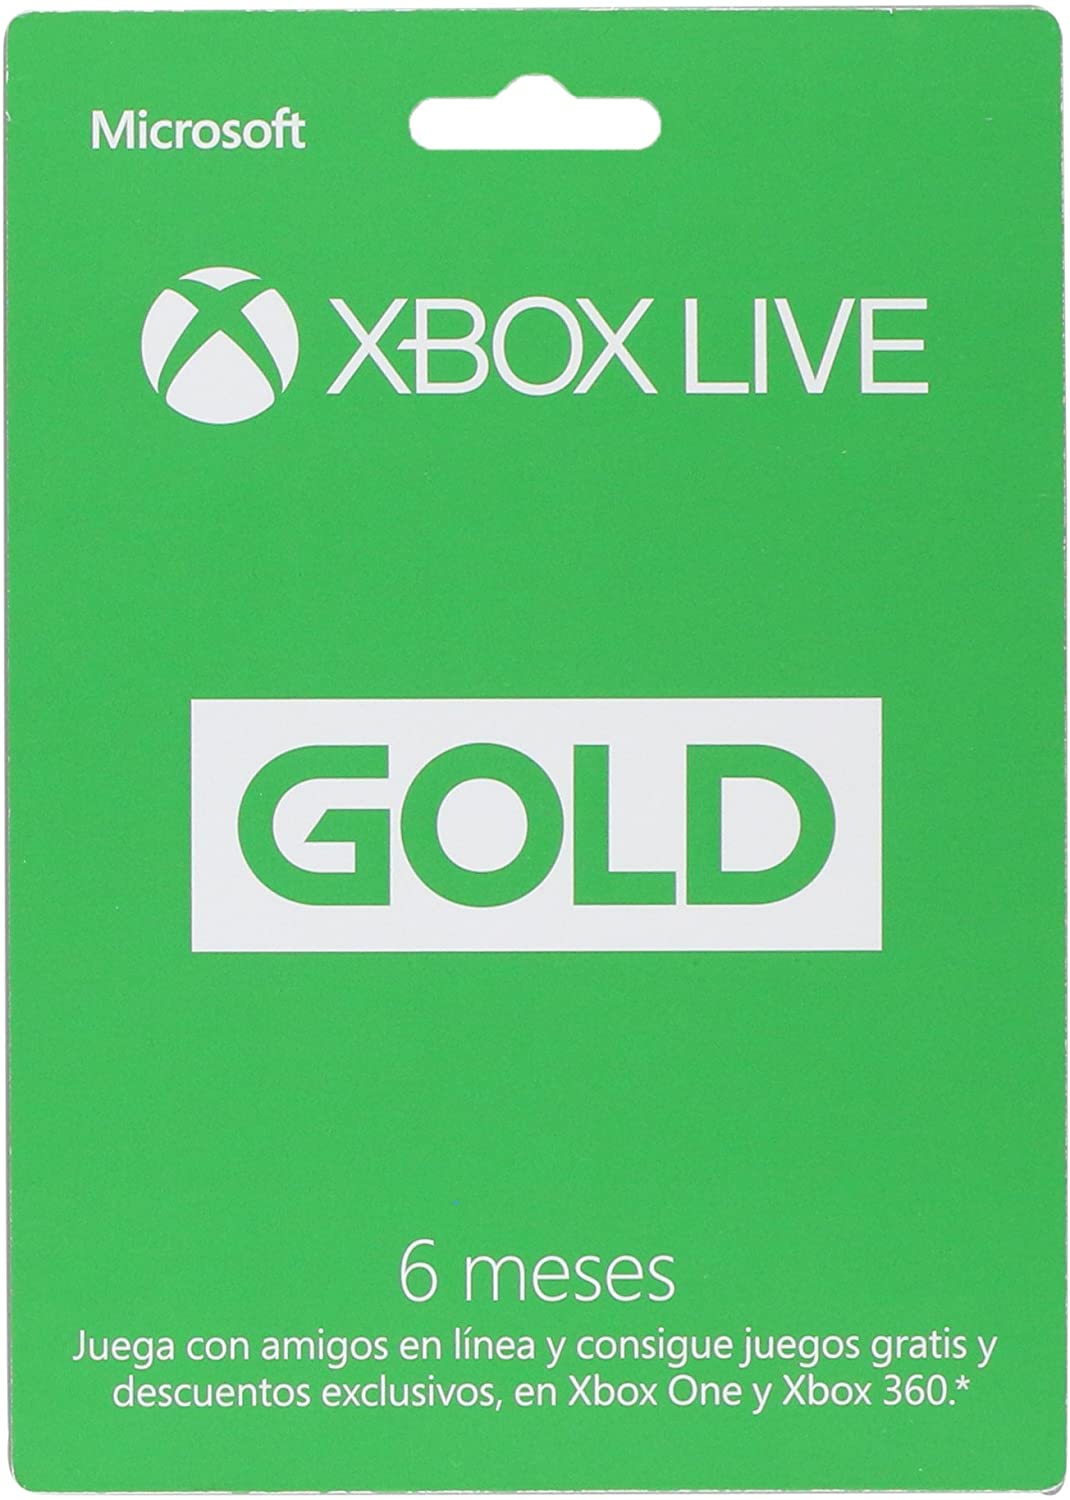 DIG TF XBOX LIVE GOLD 06 MESES FPP LATAM.-ONE - Ulident